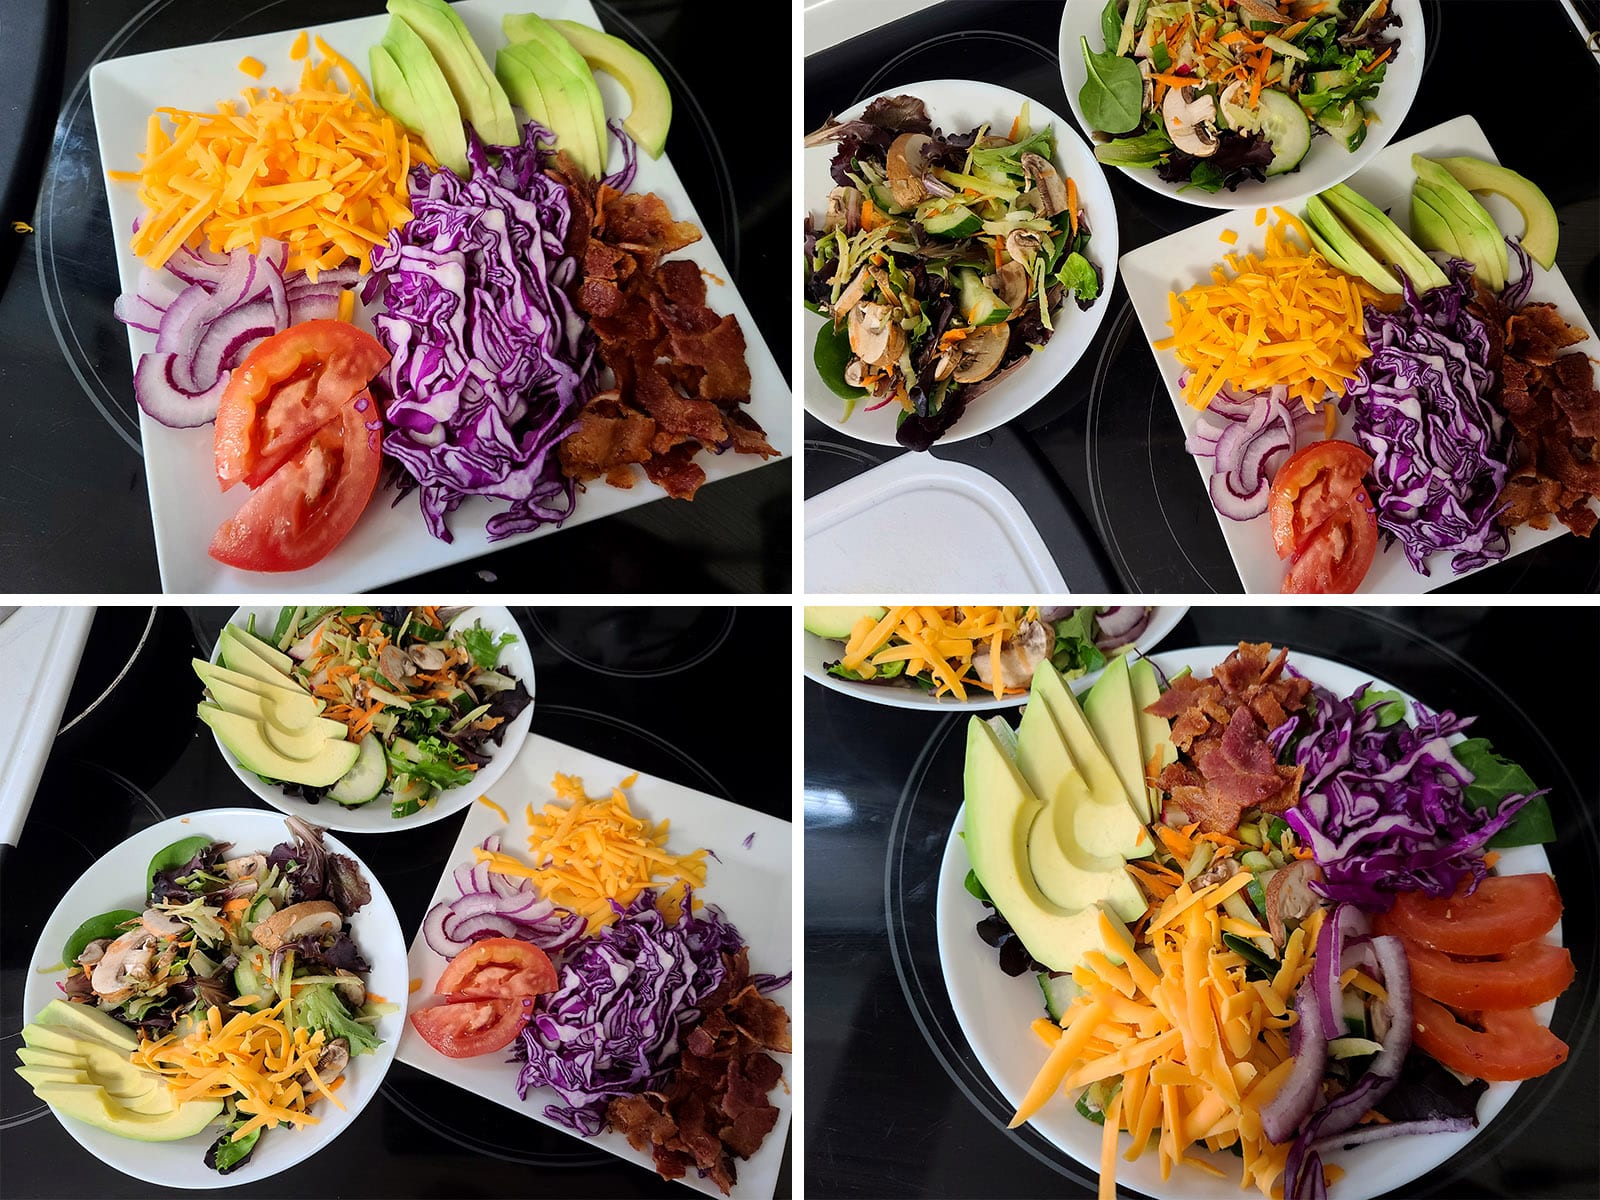 A 4 part image showing the topping ingredients being assembled and arranged on top of the base salads.